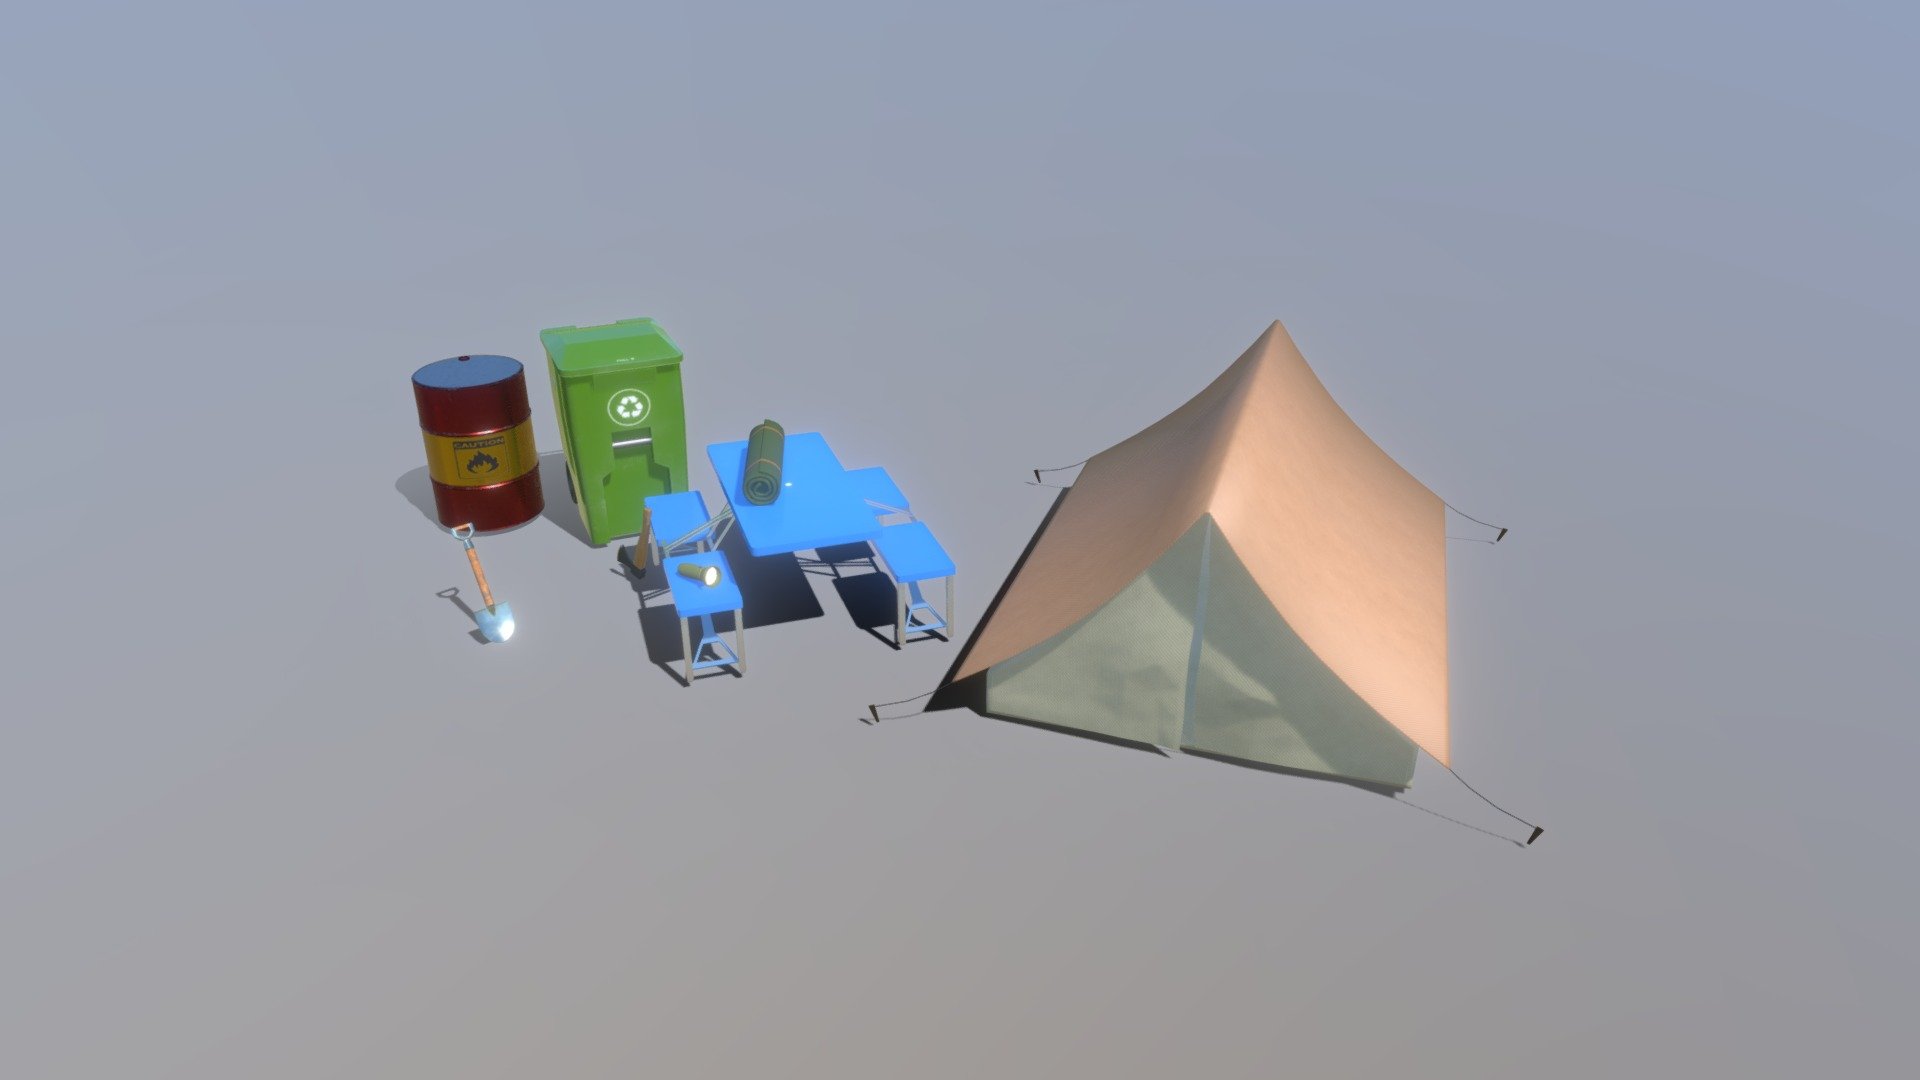 Outdoor assets - 8 pack


Tent
Garbage container
Gas drum
Folding table
Axe
Shovel
Rolled sleeping mattress
Flashlight

High quality textures, 2K resolution, PNG format.
Included maps:
Base color (easy color customization for all objects);
Height/Bump;
Normal;
Roughness;
Metalness;

Low-poly/game-ready - Outdoor Props - 8 pack - Buy Royalty Free 3D model by mazormedia 3d model